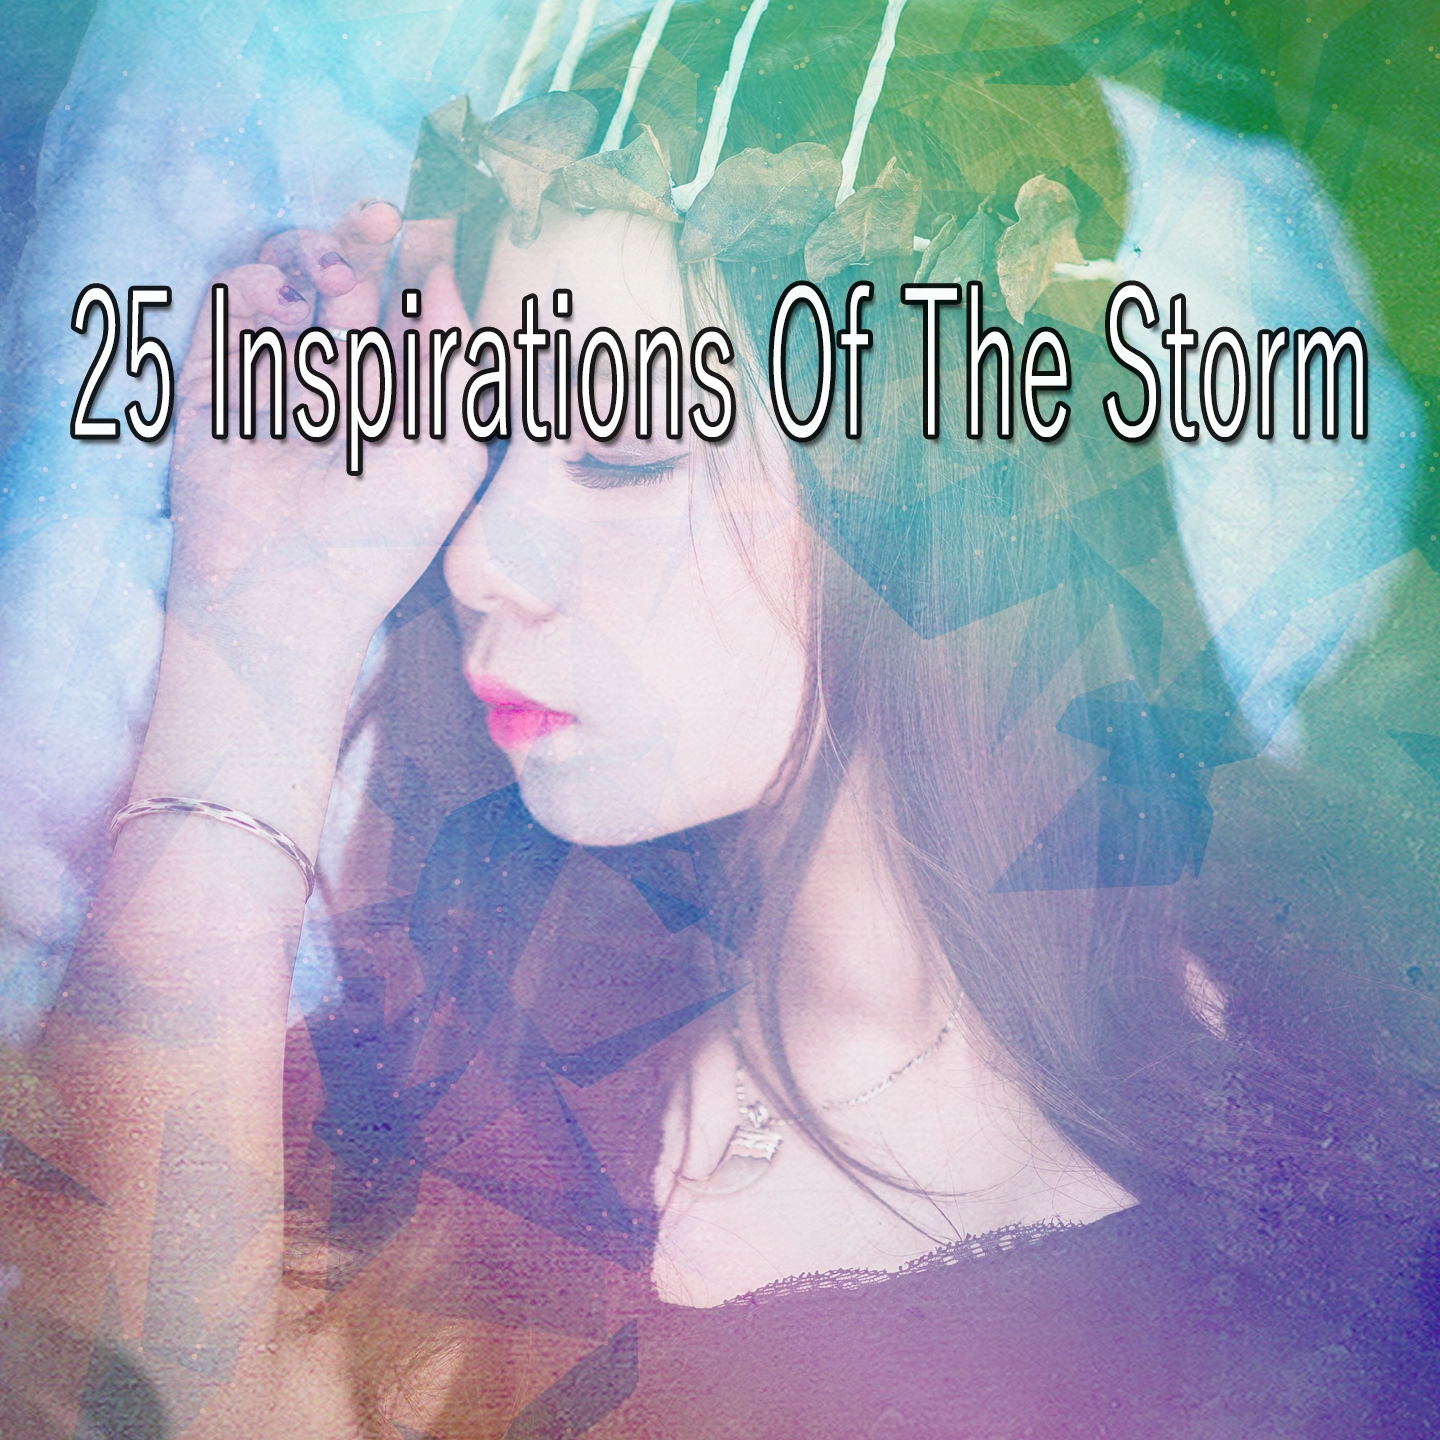 25 Inspirations Of The Storm